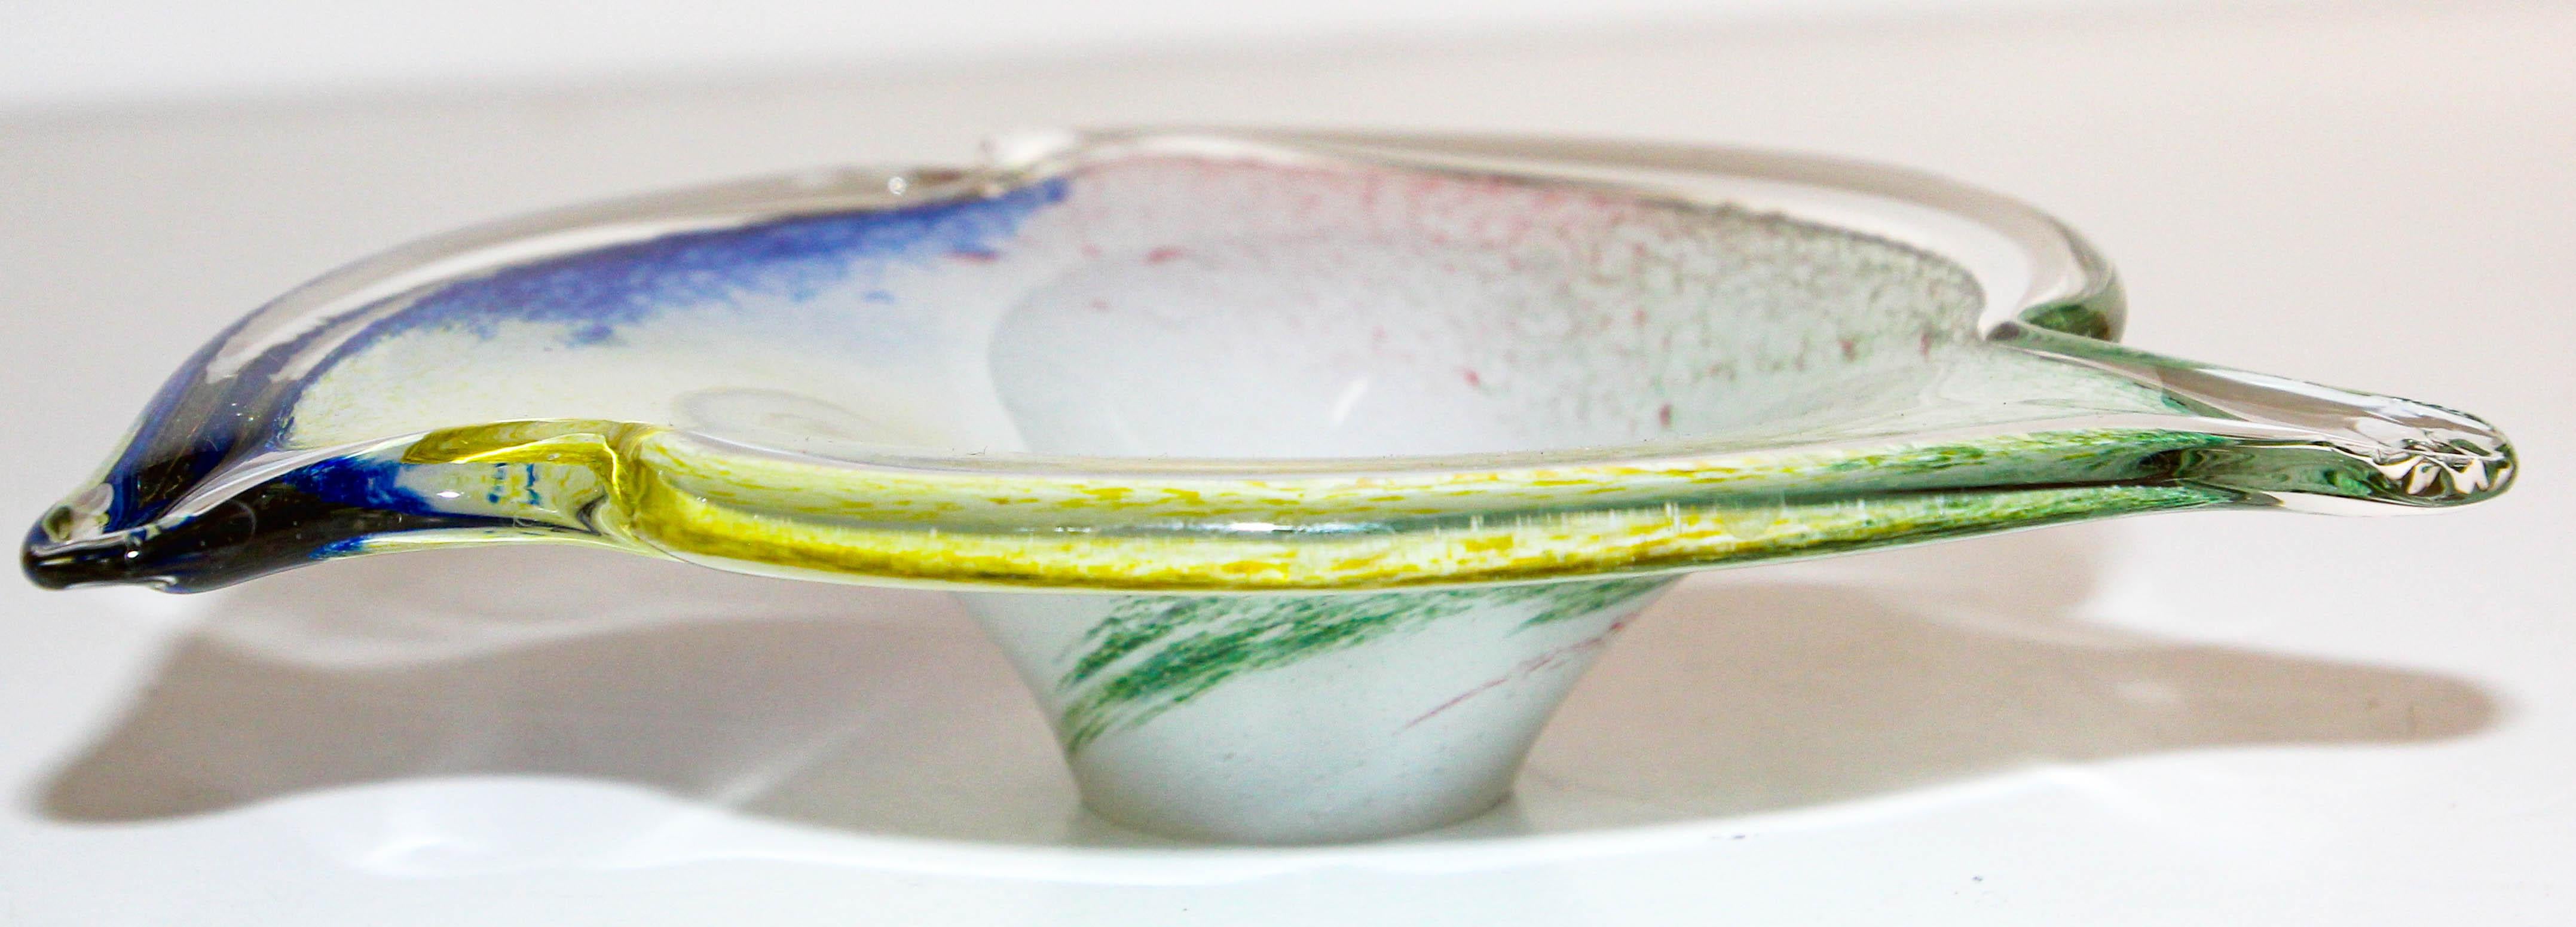 Seguso Sommerso Murano Art Glass Triangular Bowl or Ashtray, Italy 1960s For Sale 7